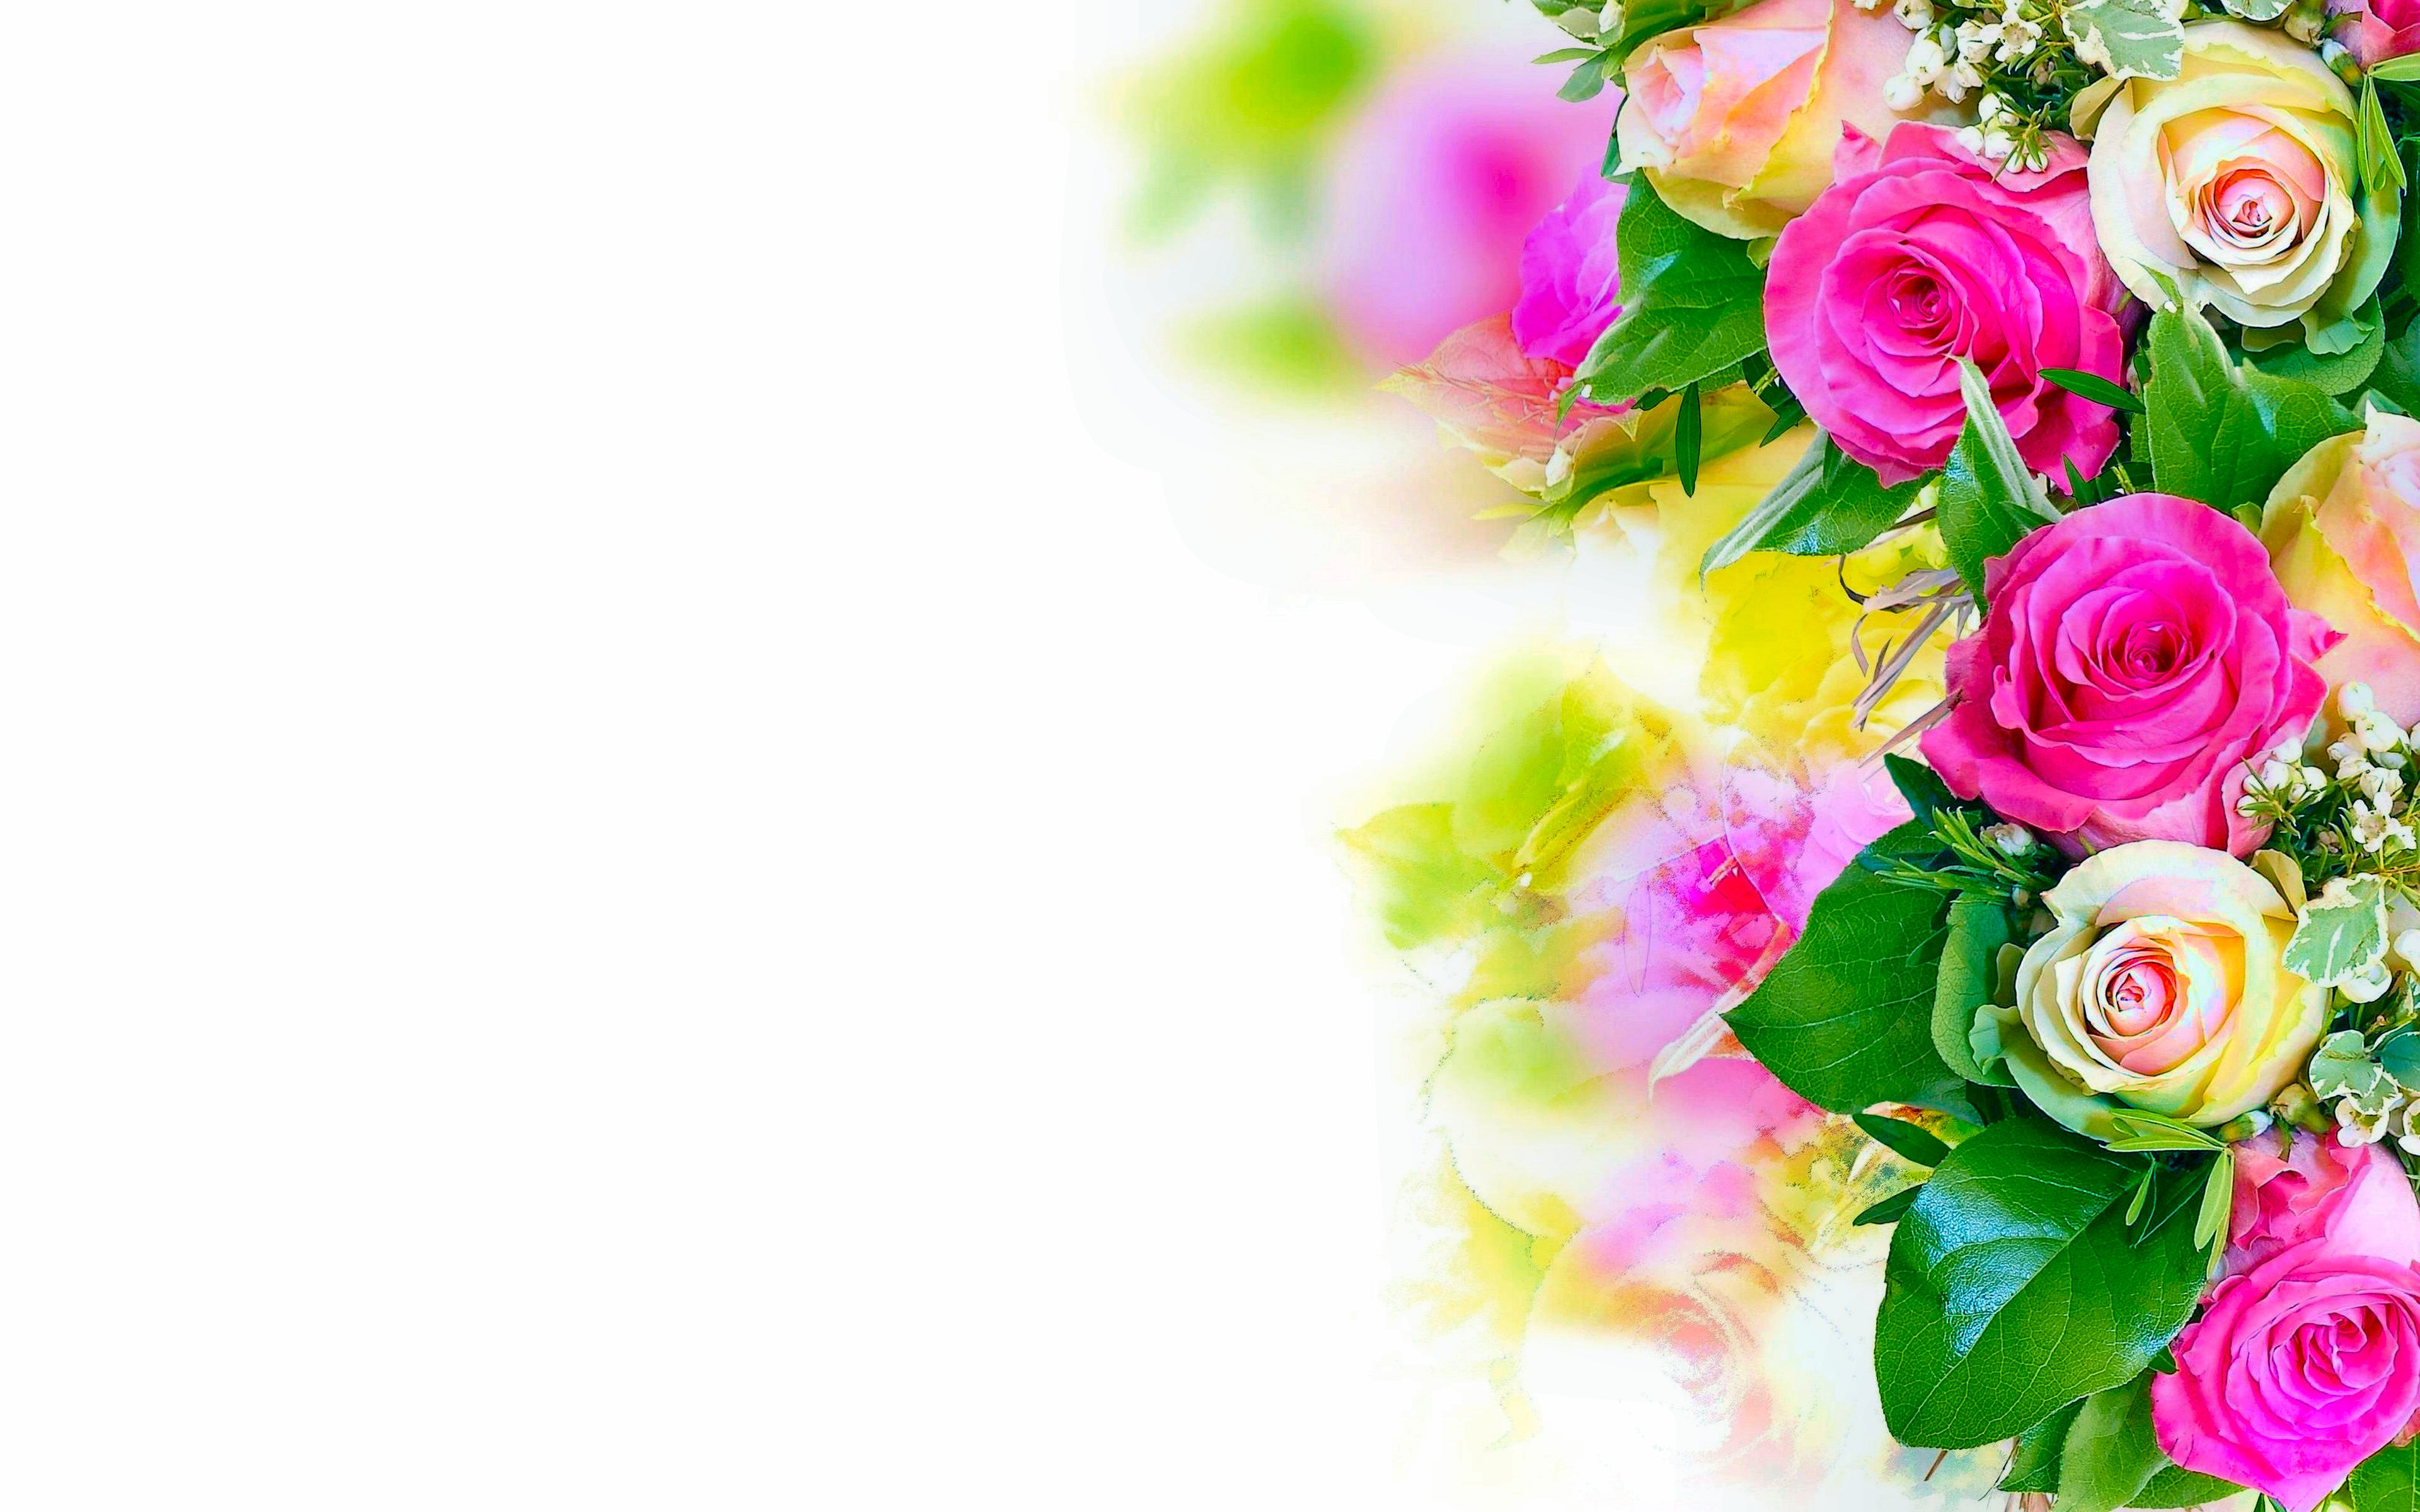 Free HD bouquet, flowers, rose, pastel, earth, flower, pink rose, white rose